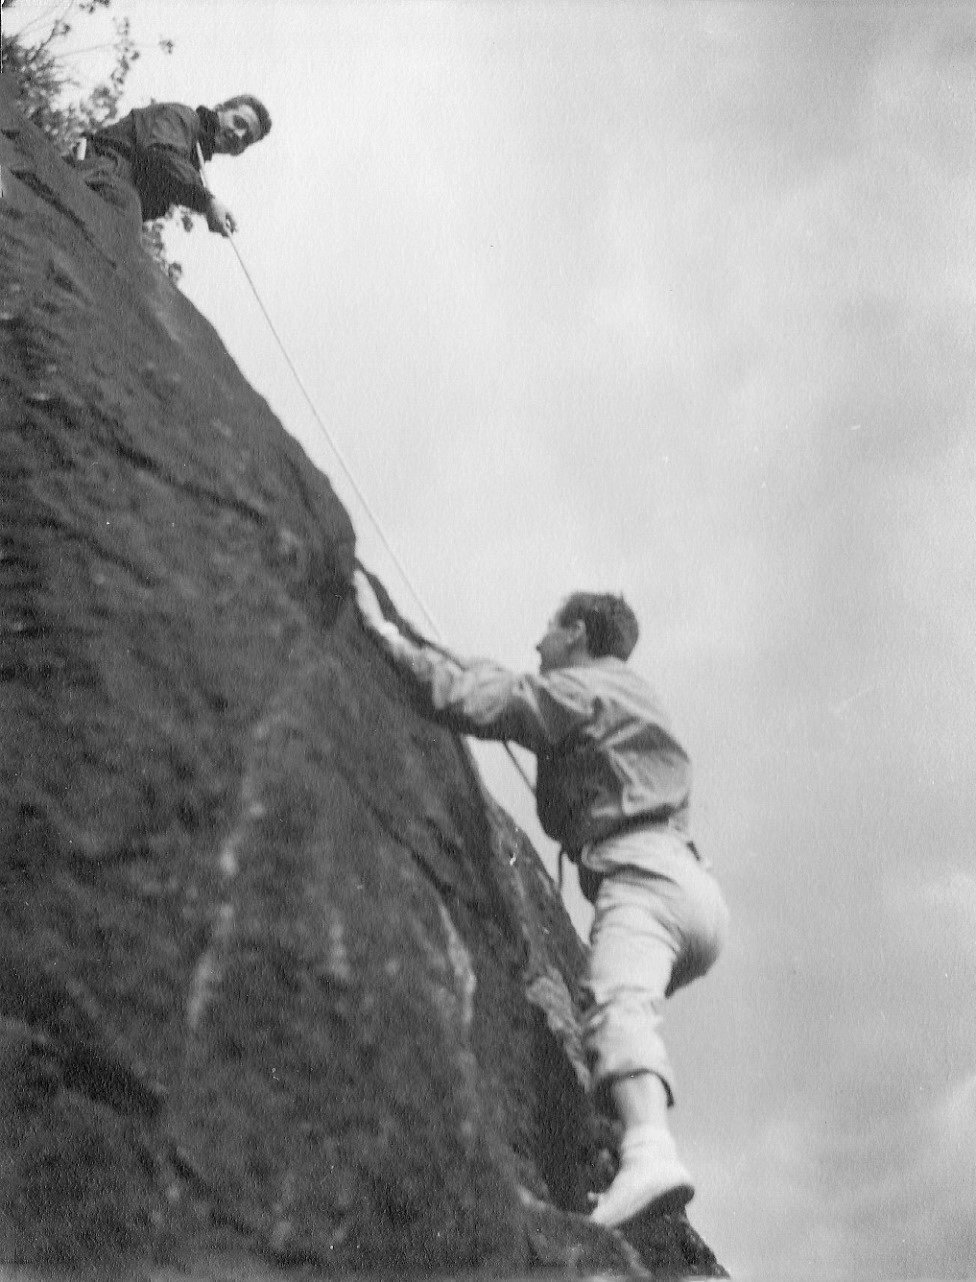 Two climbers, one at the top of the rock face holding a rope by means of which the second climber is still ascending.